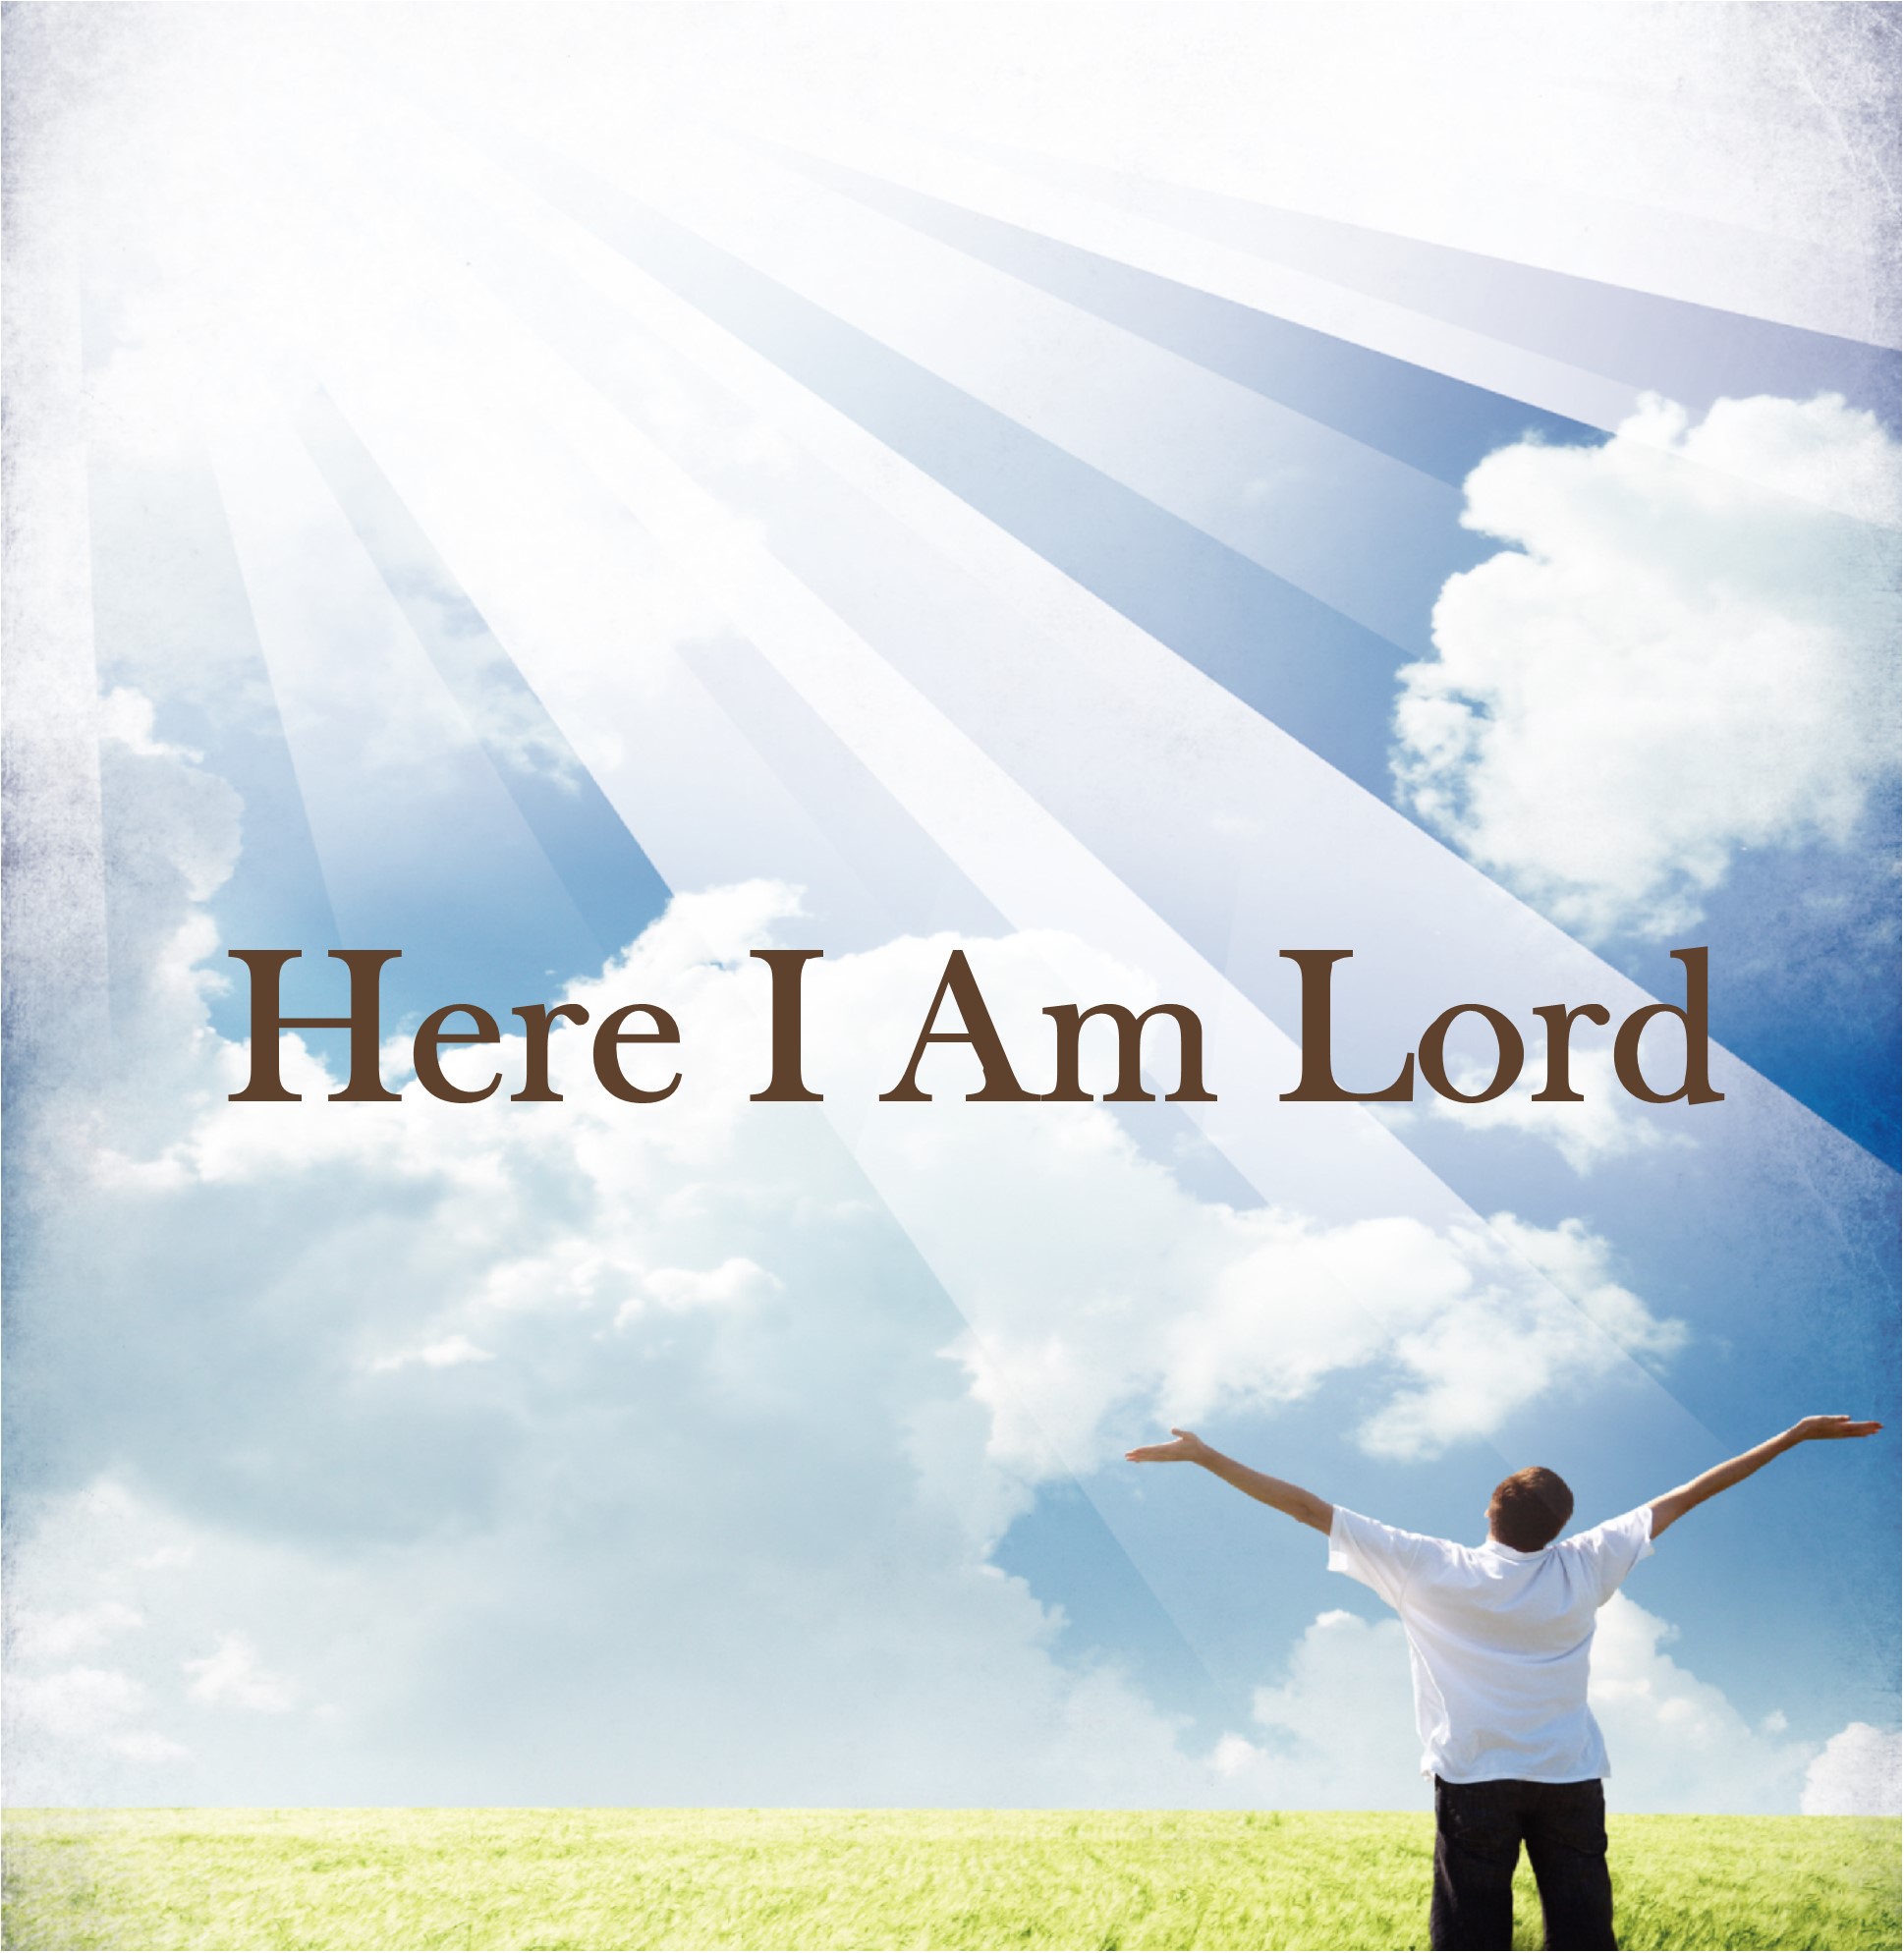 Here I am Lord (1/4)